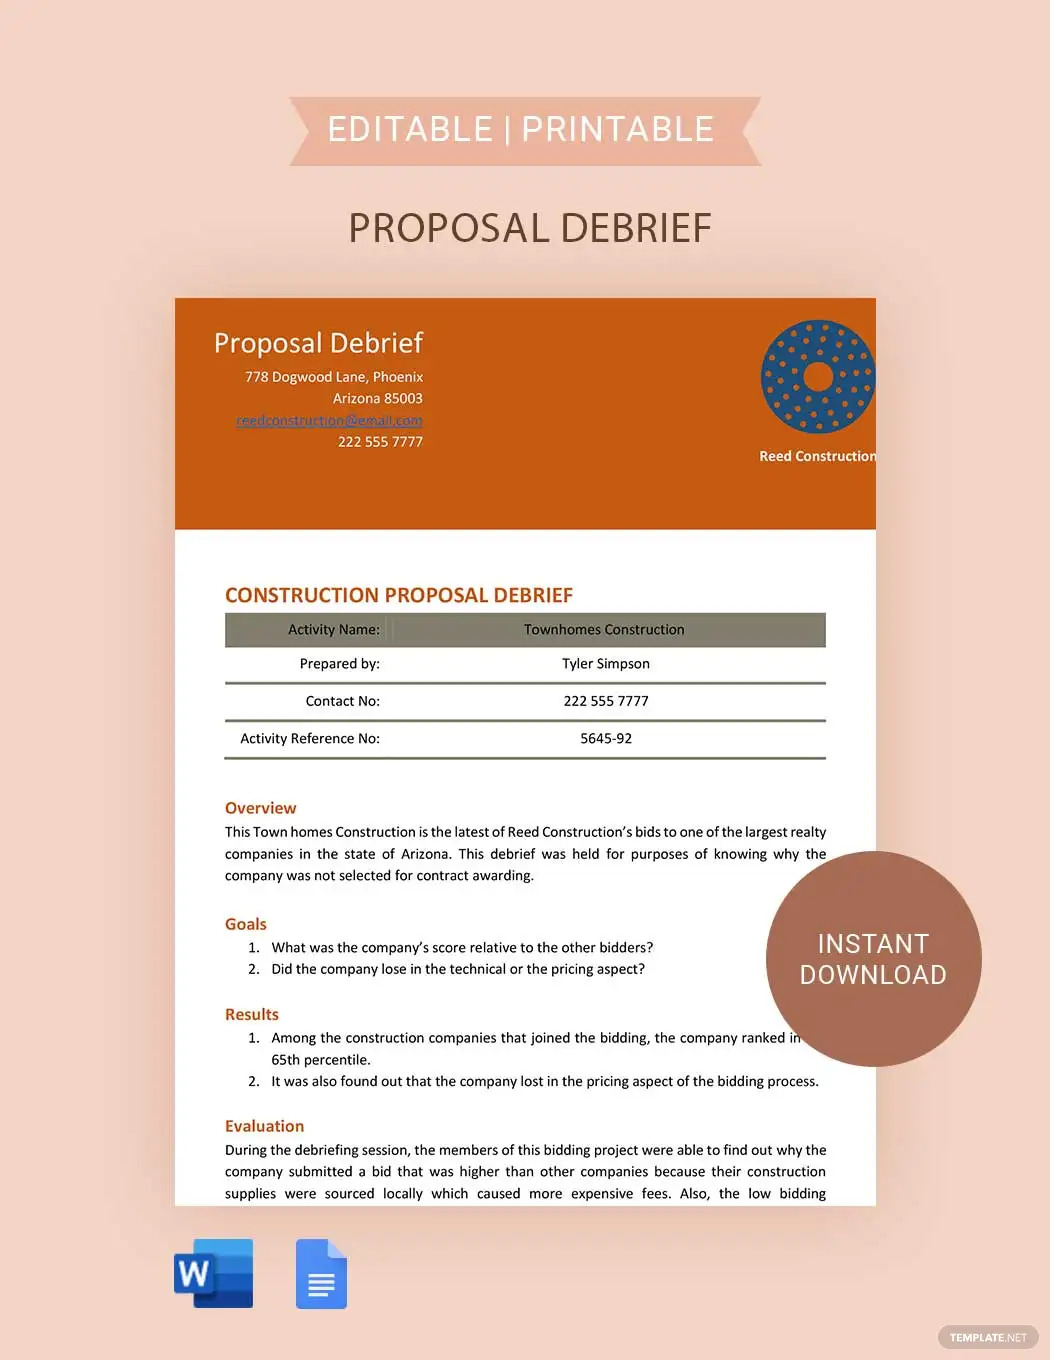 proposal debrief ideas and examples